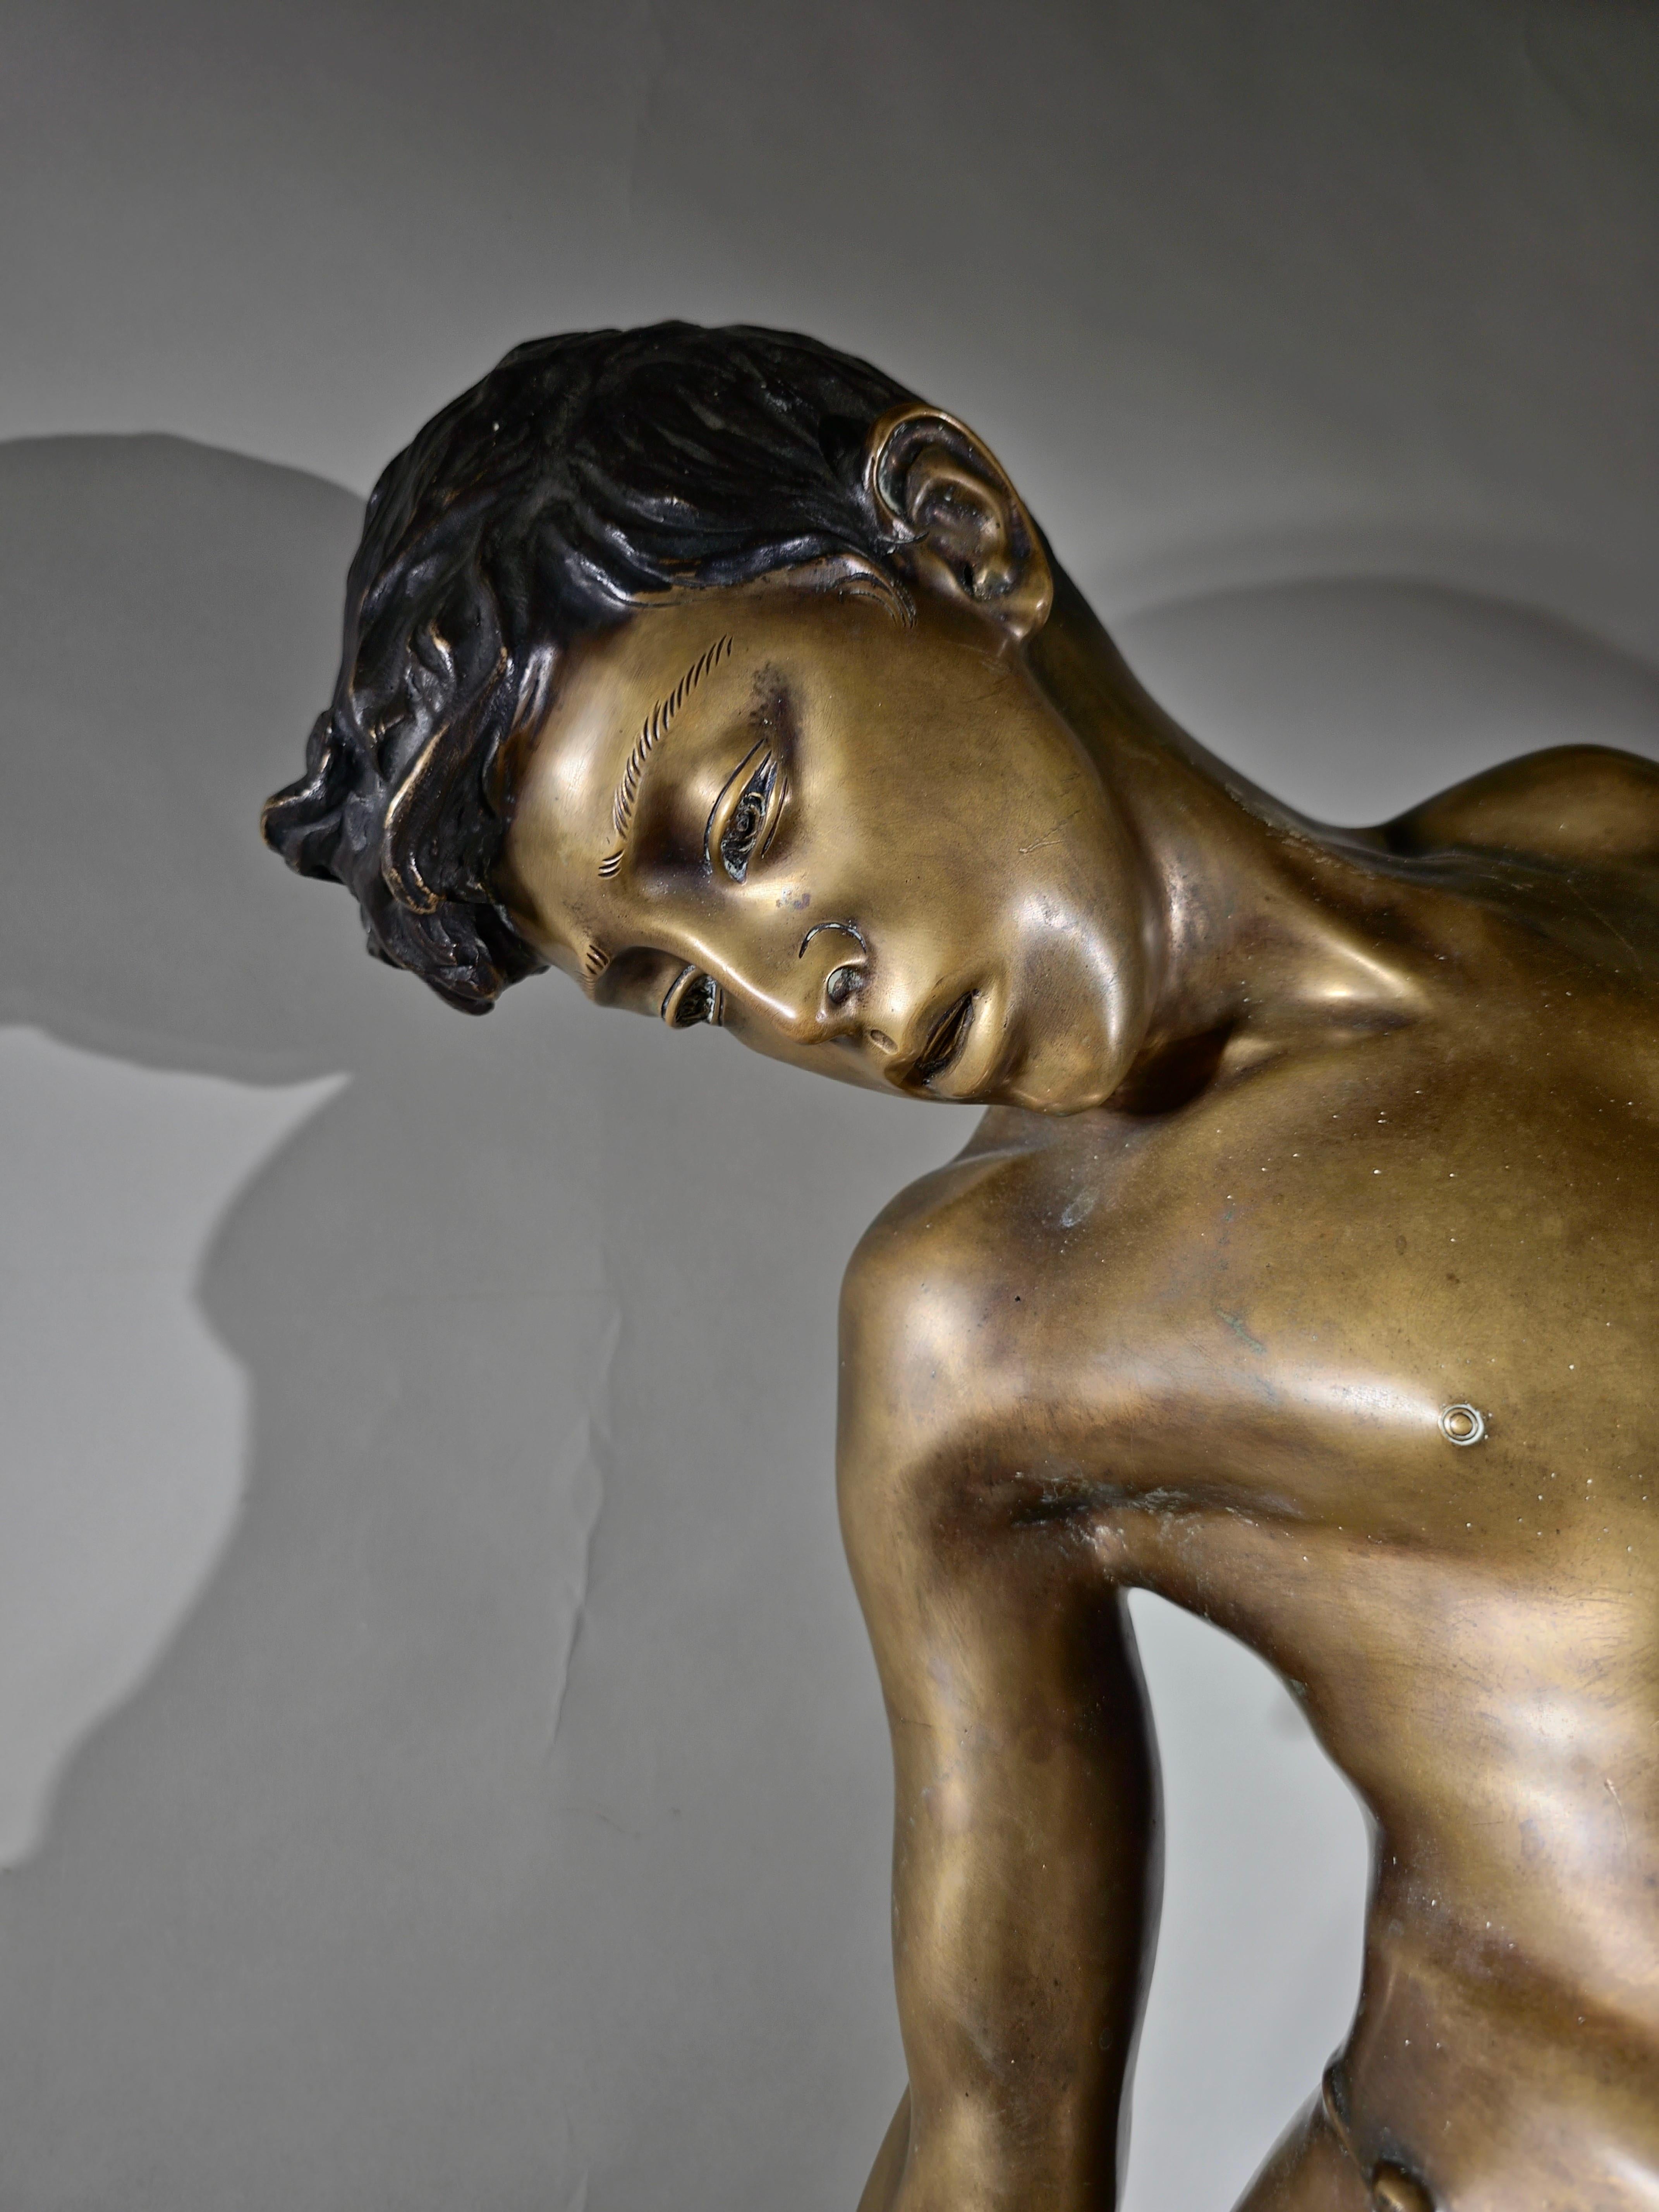 This impressive bronze sculpture depicts a child bitten by a crab, capturing a dramatic and emotive moment. Signed by the renowned sculptor Annibale De Lotto (San Vito di Cadore, 1877 - Venice, 1932), this artwork evokes a sense of movement and life